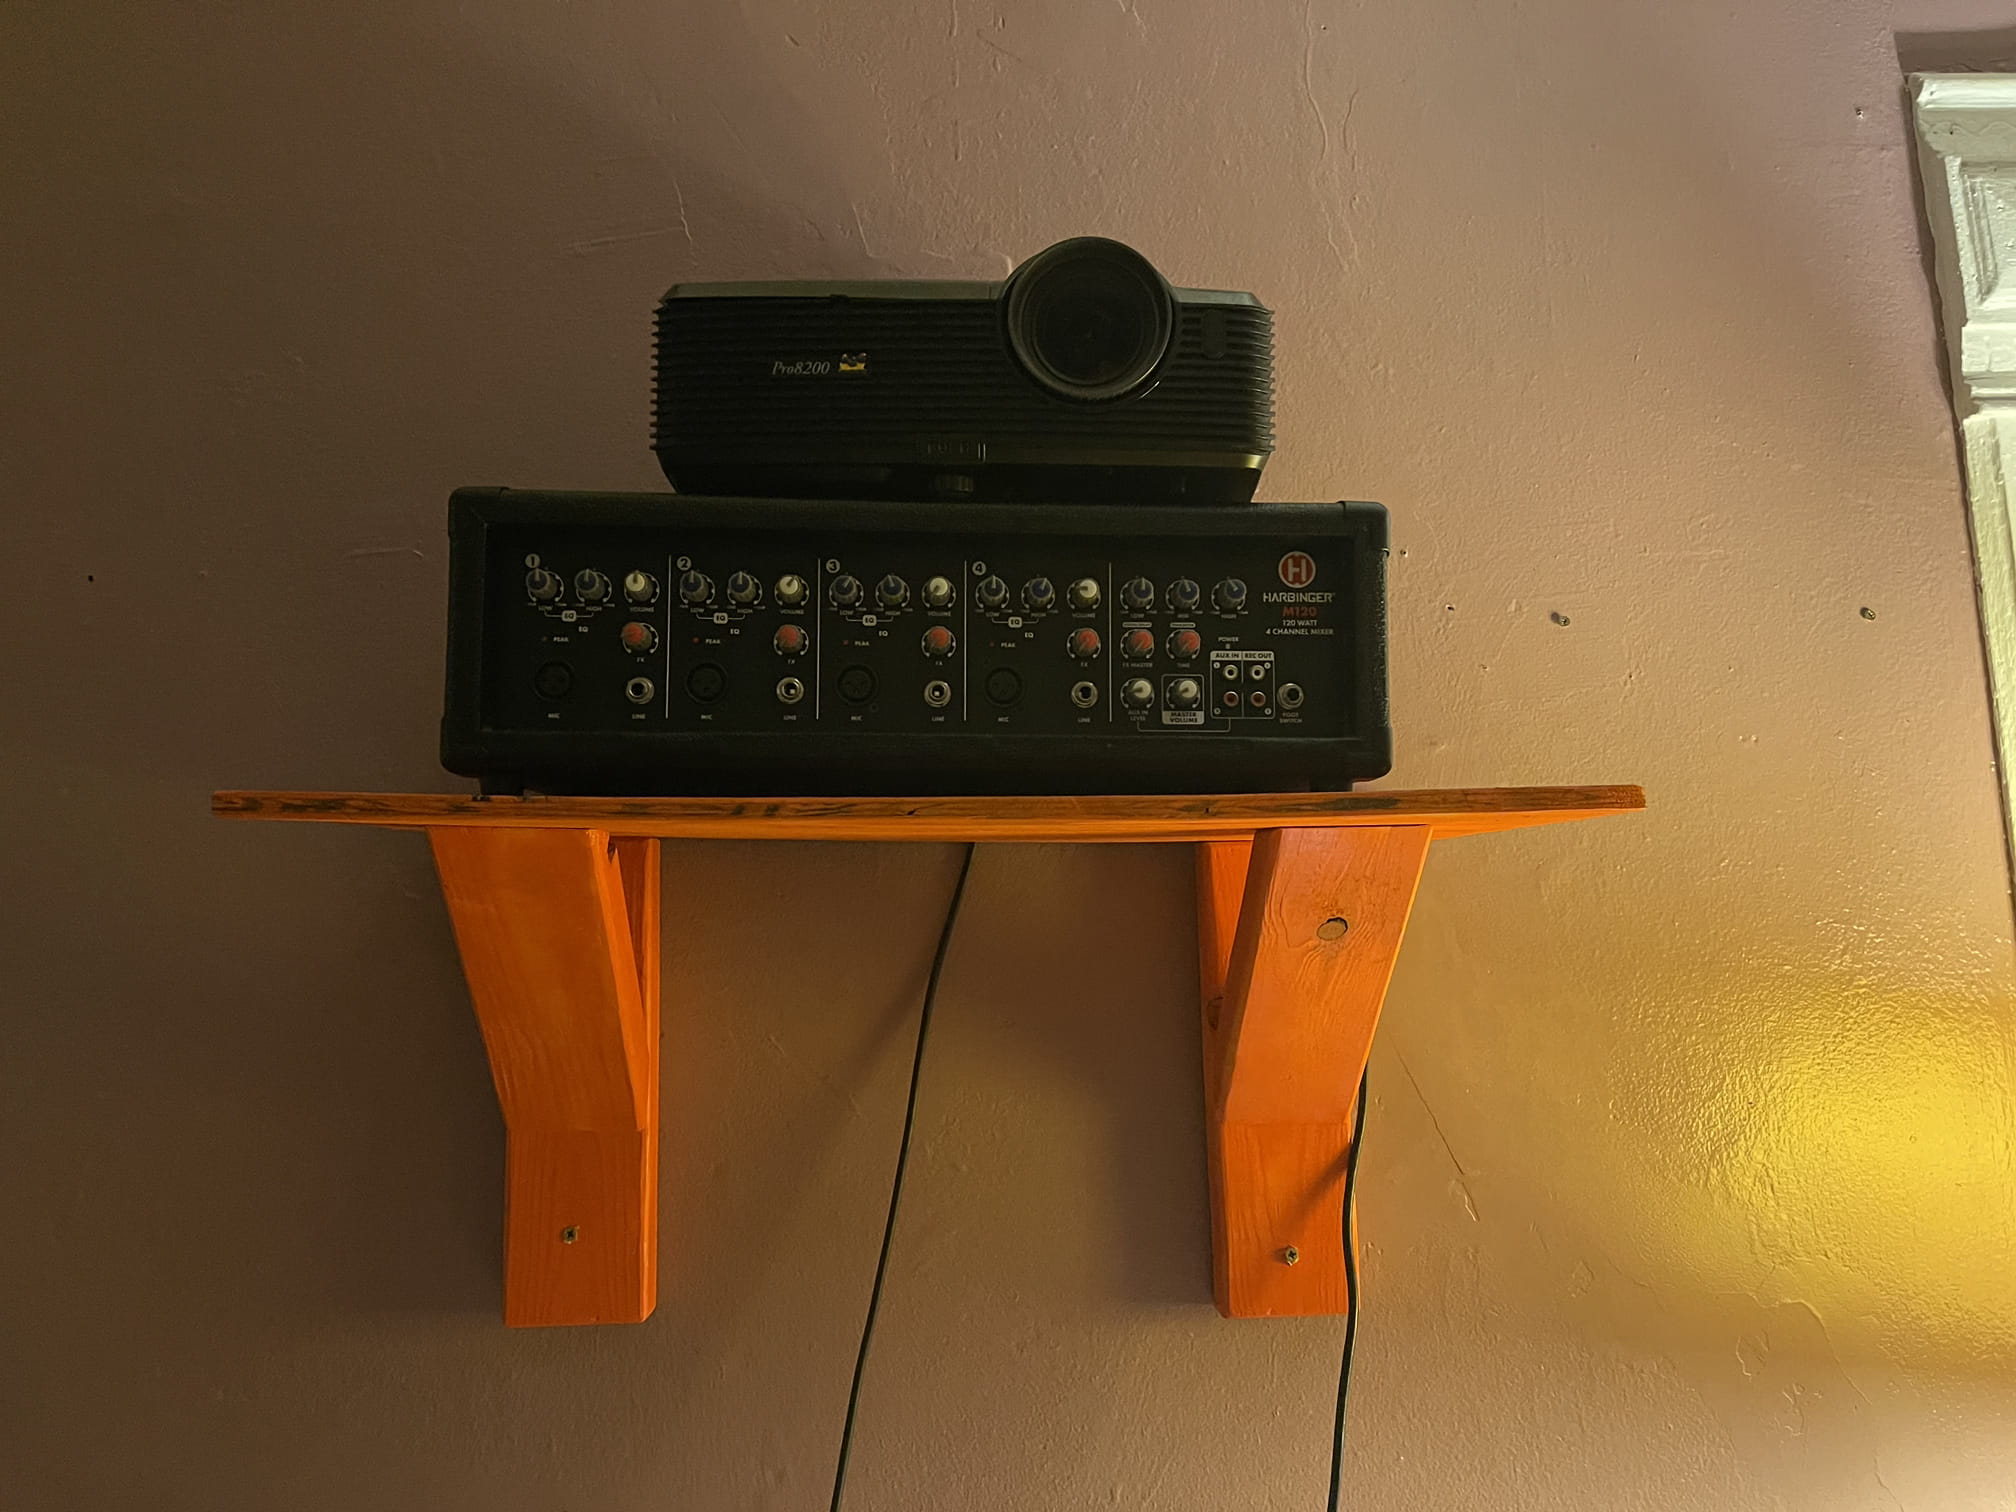 Made this cute lil shelf for projector/audio